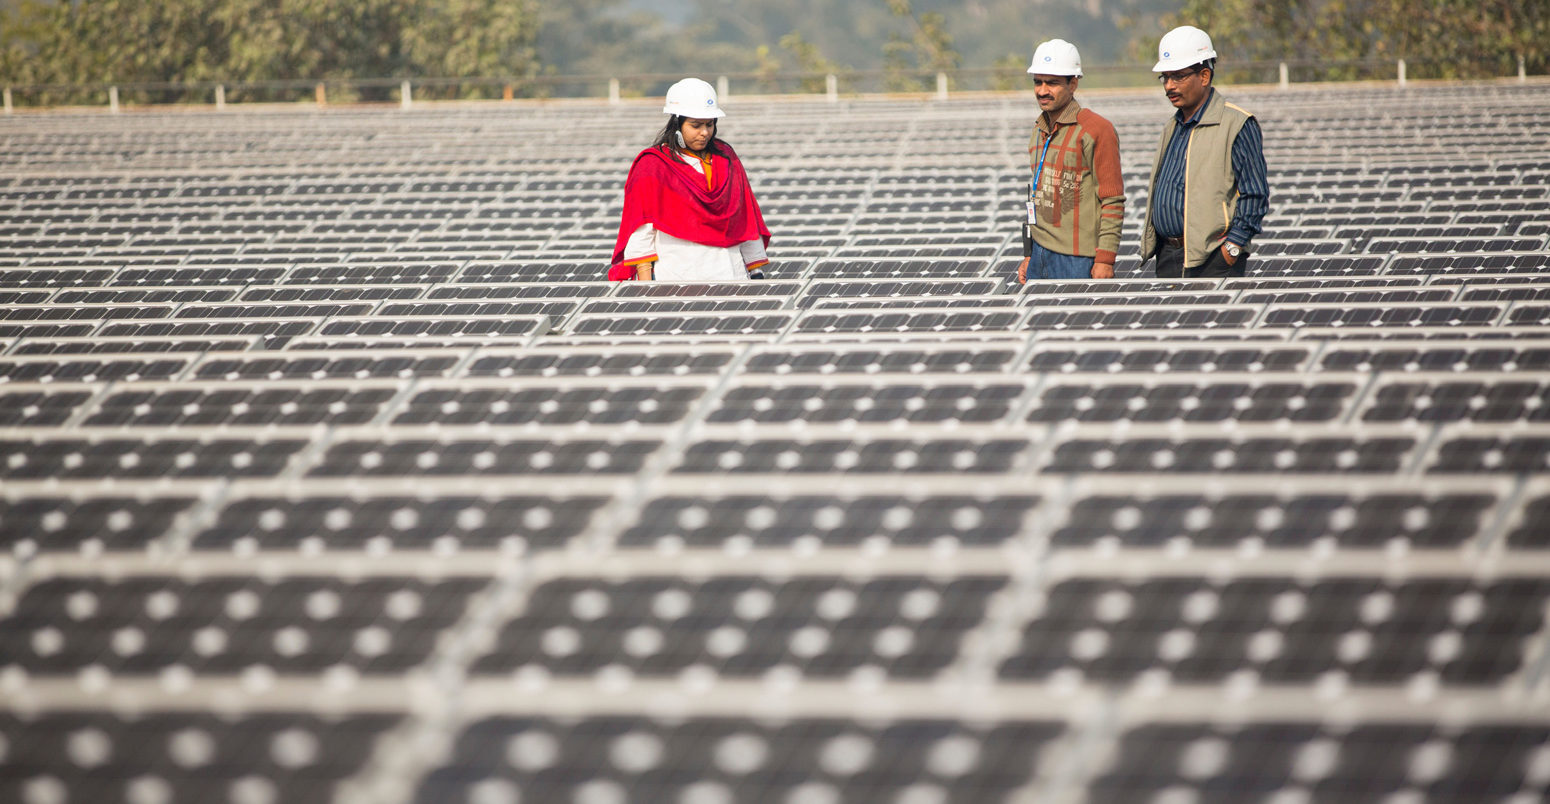 Workers-at-a-1MW-solar-power-station-run-by-Tata-Power-on-the-roof-of-an-electricity-company-in-Delhi,印